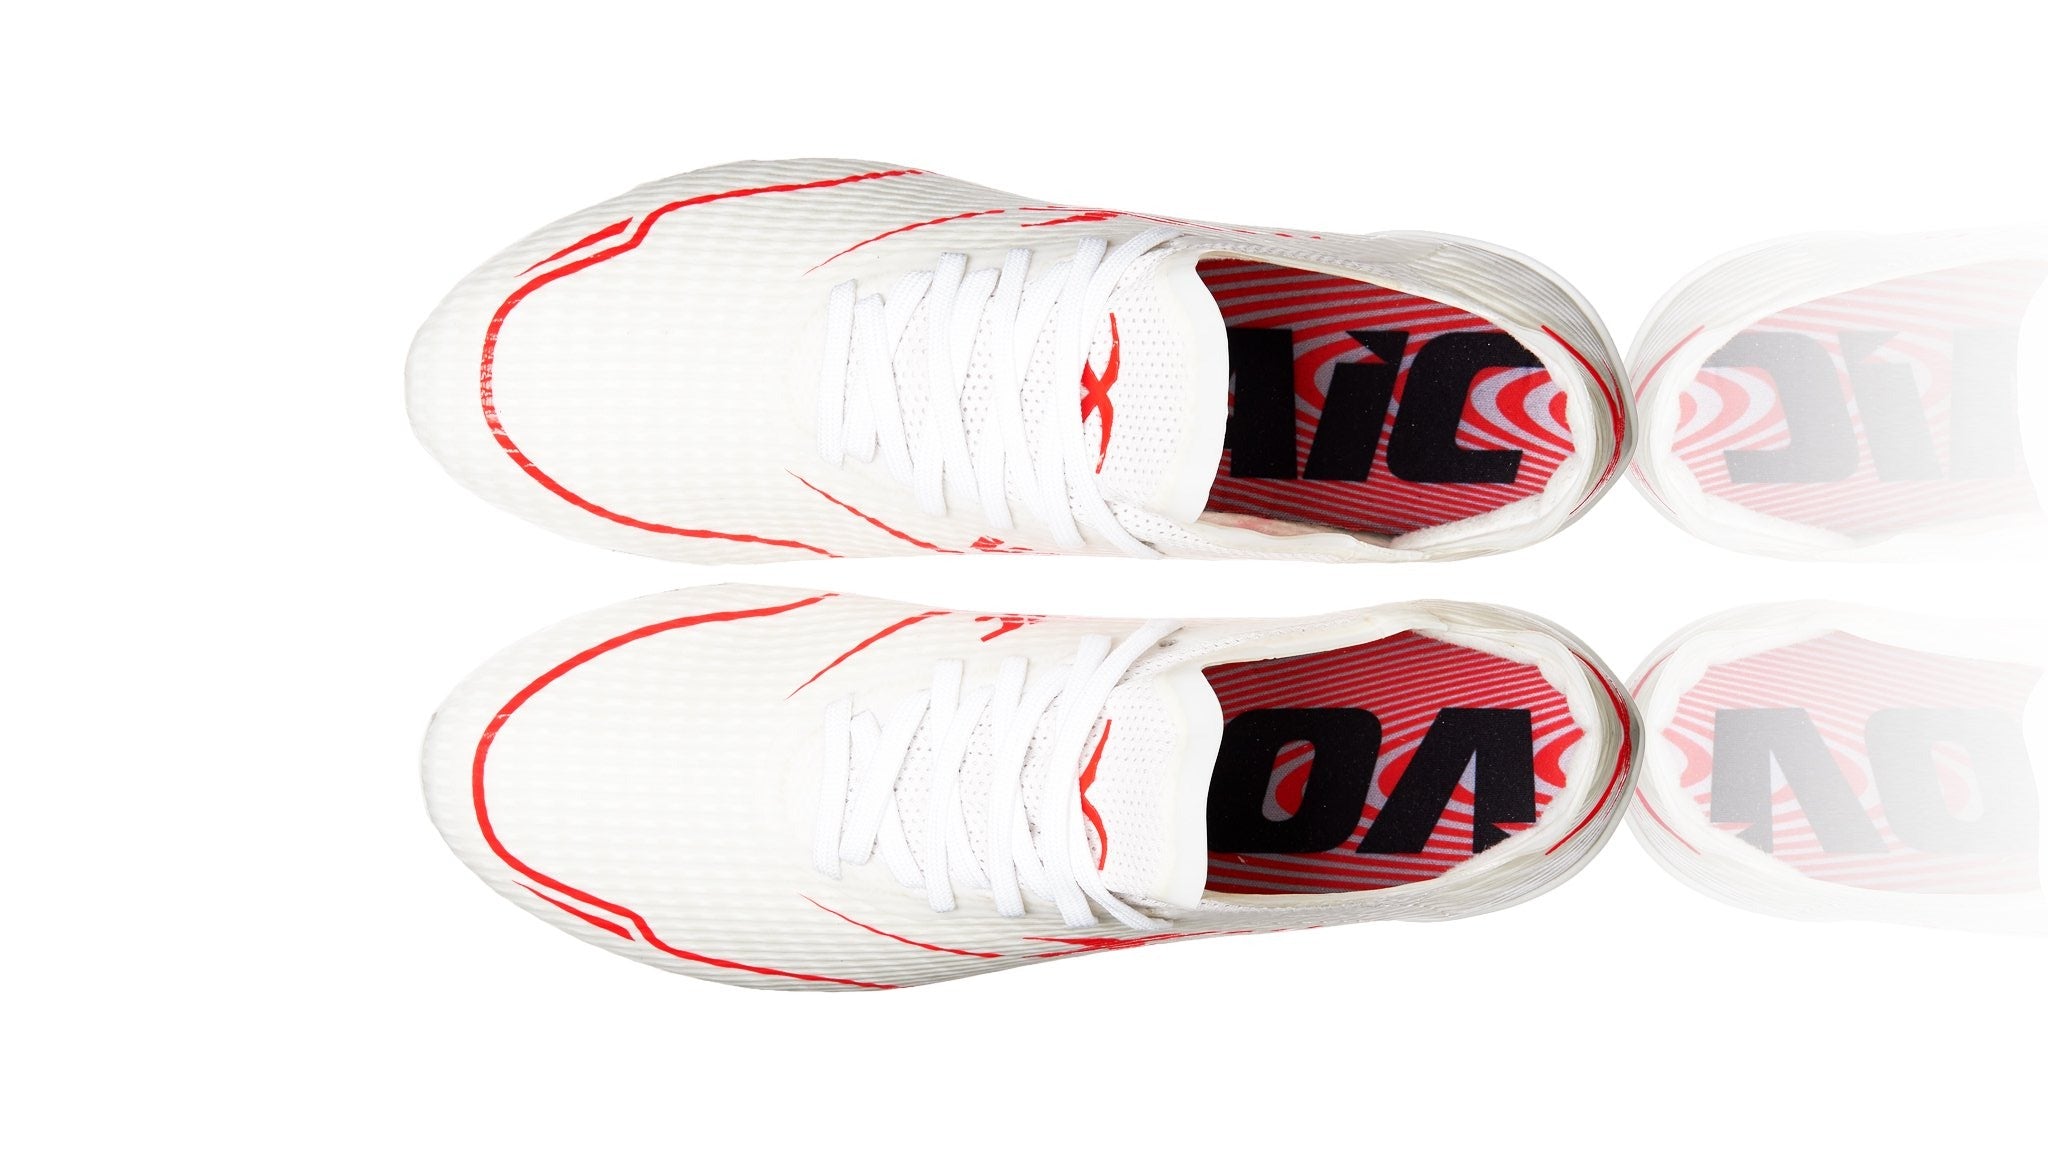 white-and-red-womens-football-boots-xblades